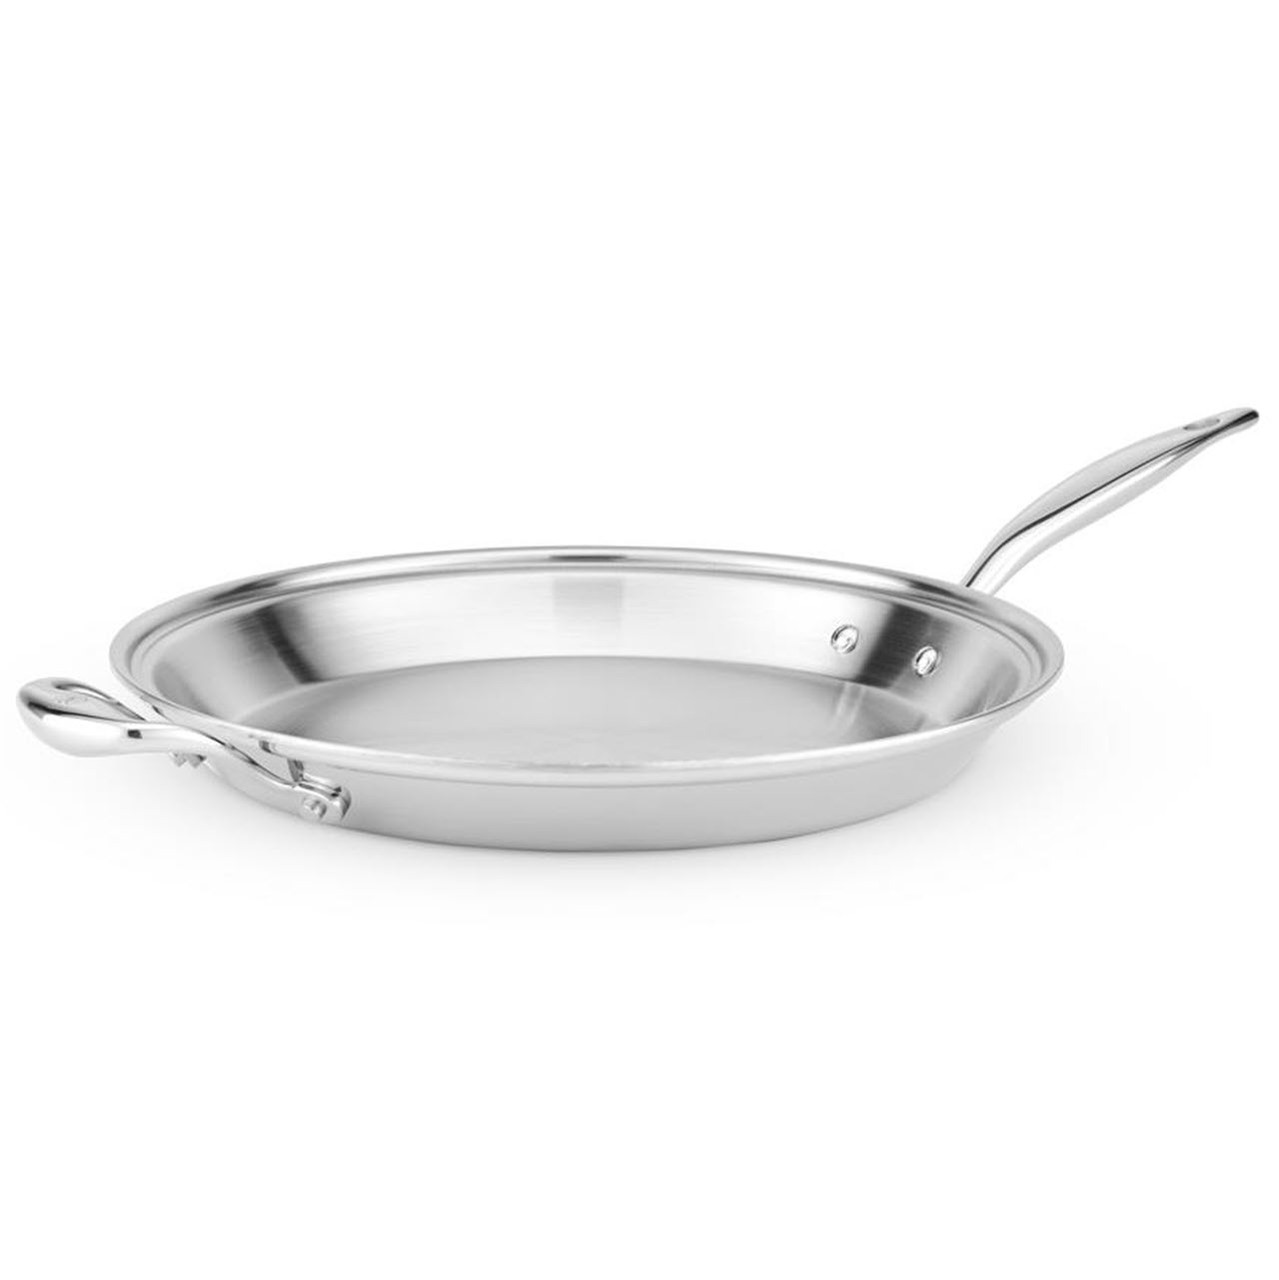 Cuisinart Contour Stainless Steel Skillet with Helper Handle, 12 inch